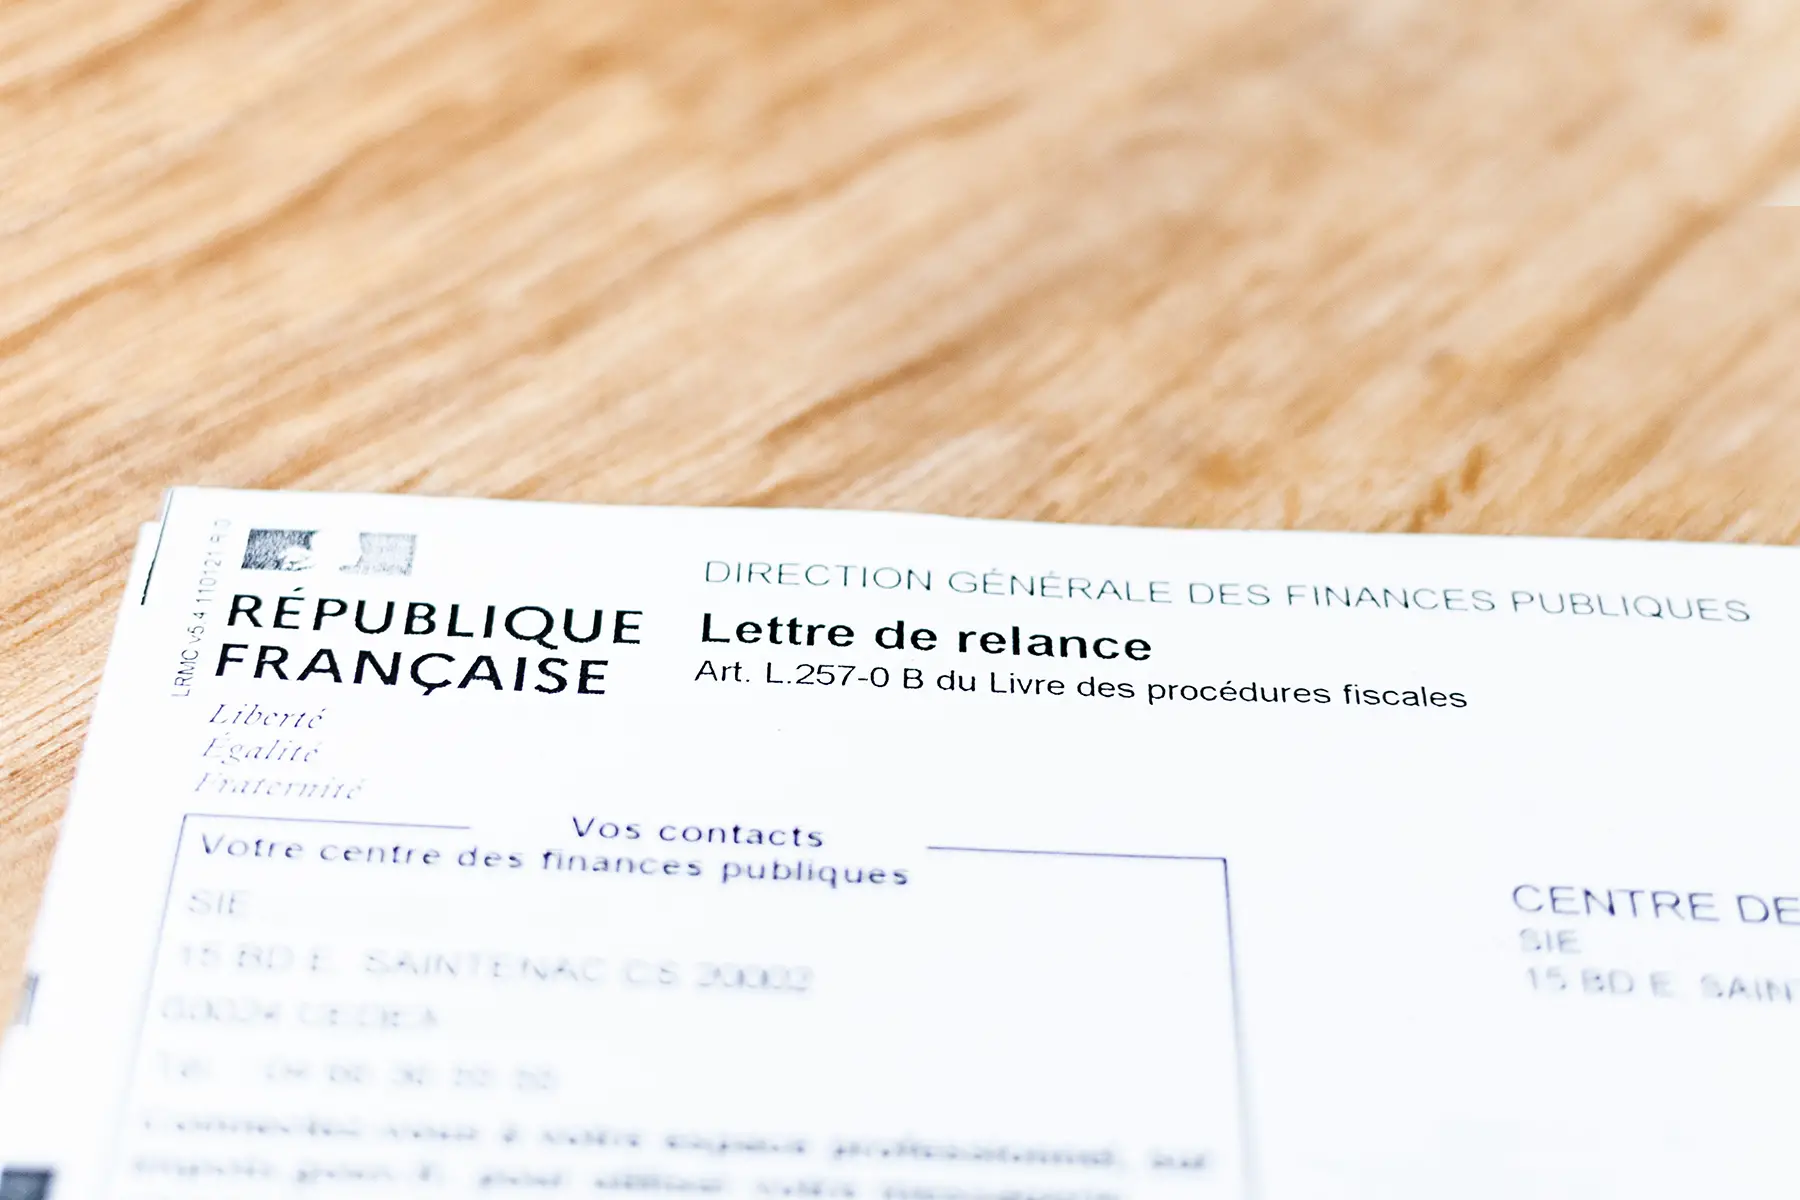 A reminder letter to file income taxes in France